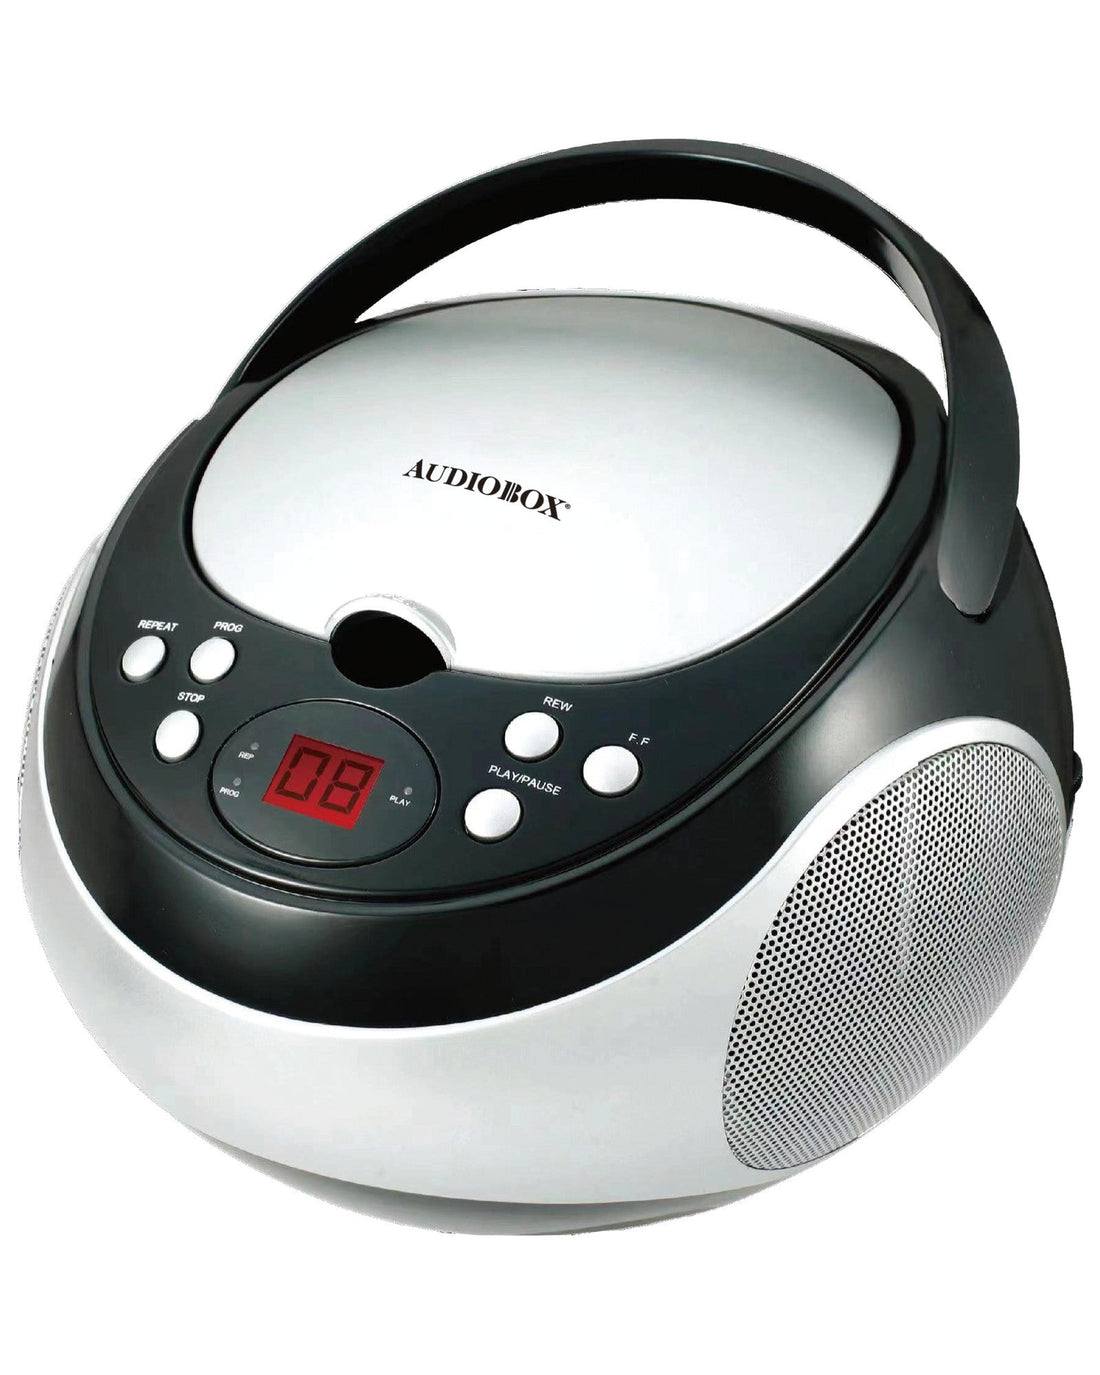 Audiobox CDX-100 Portable CD Player with AM/FM Stereo Radio - Top ElectrosCD PlayerCDX-100 - BLACK